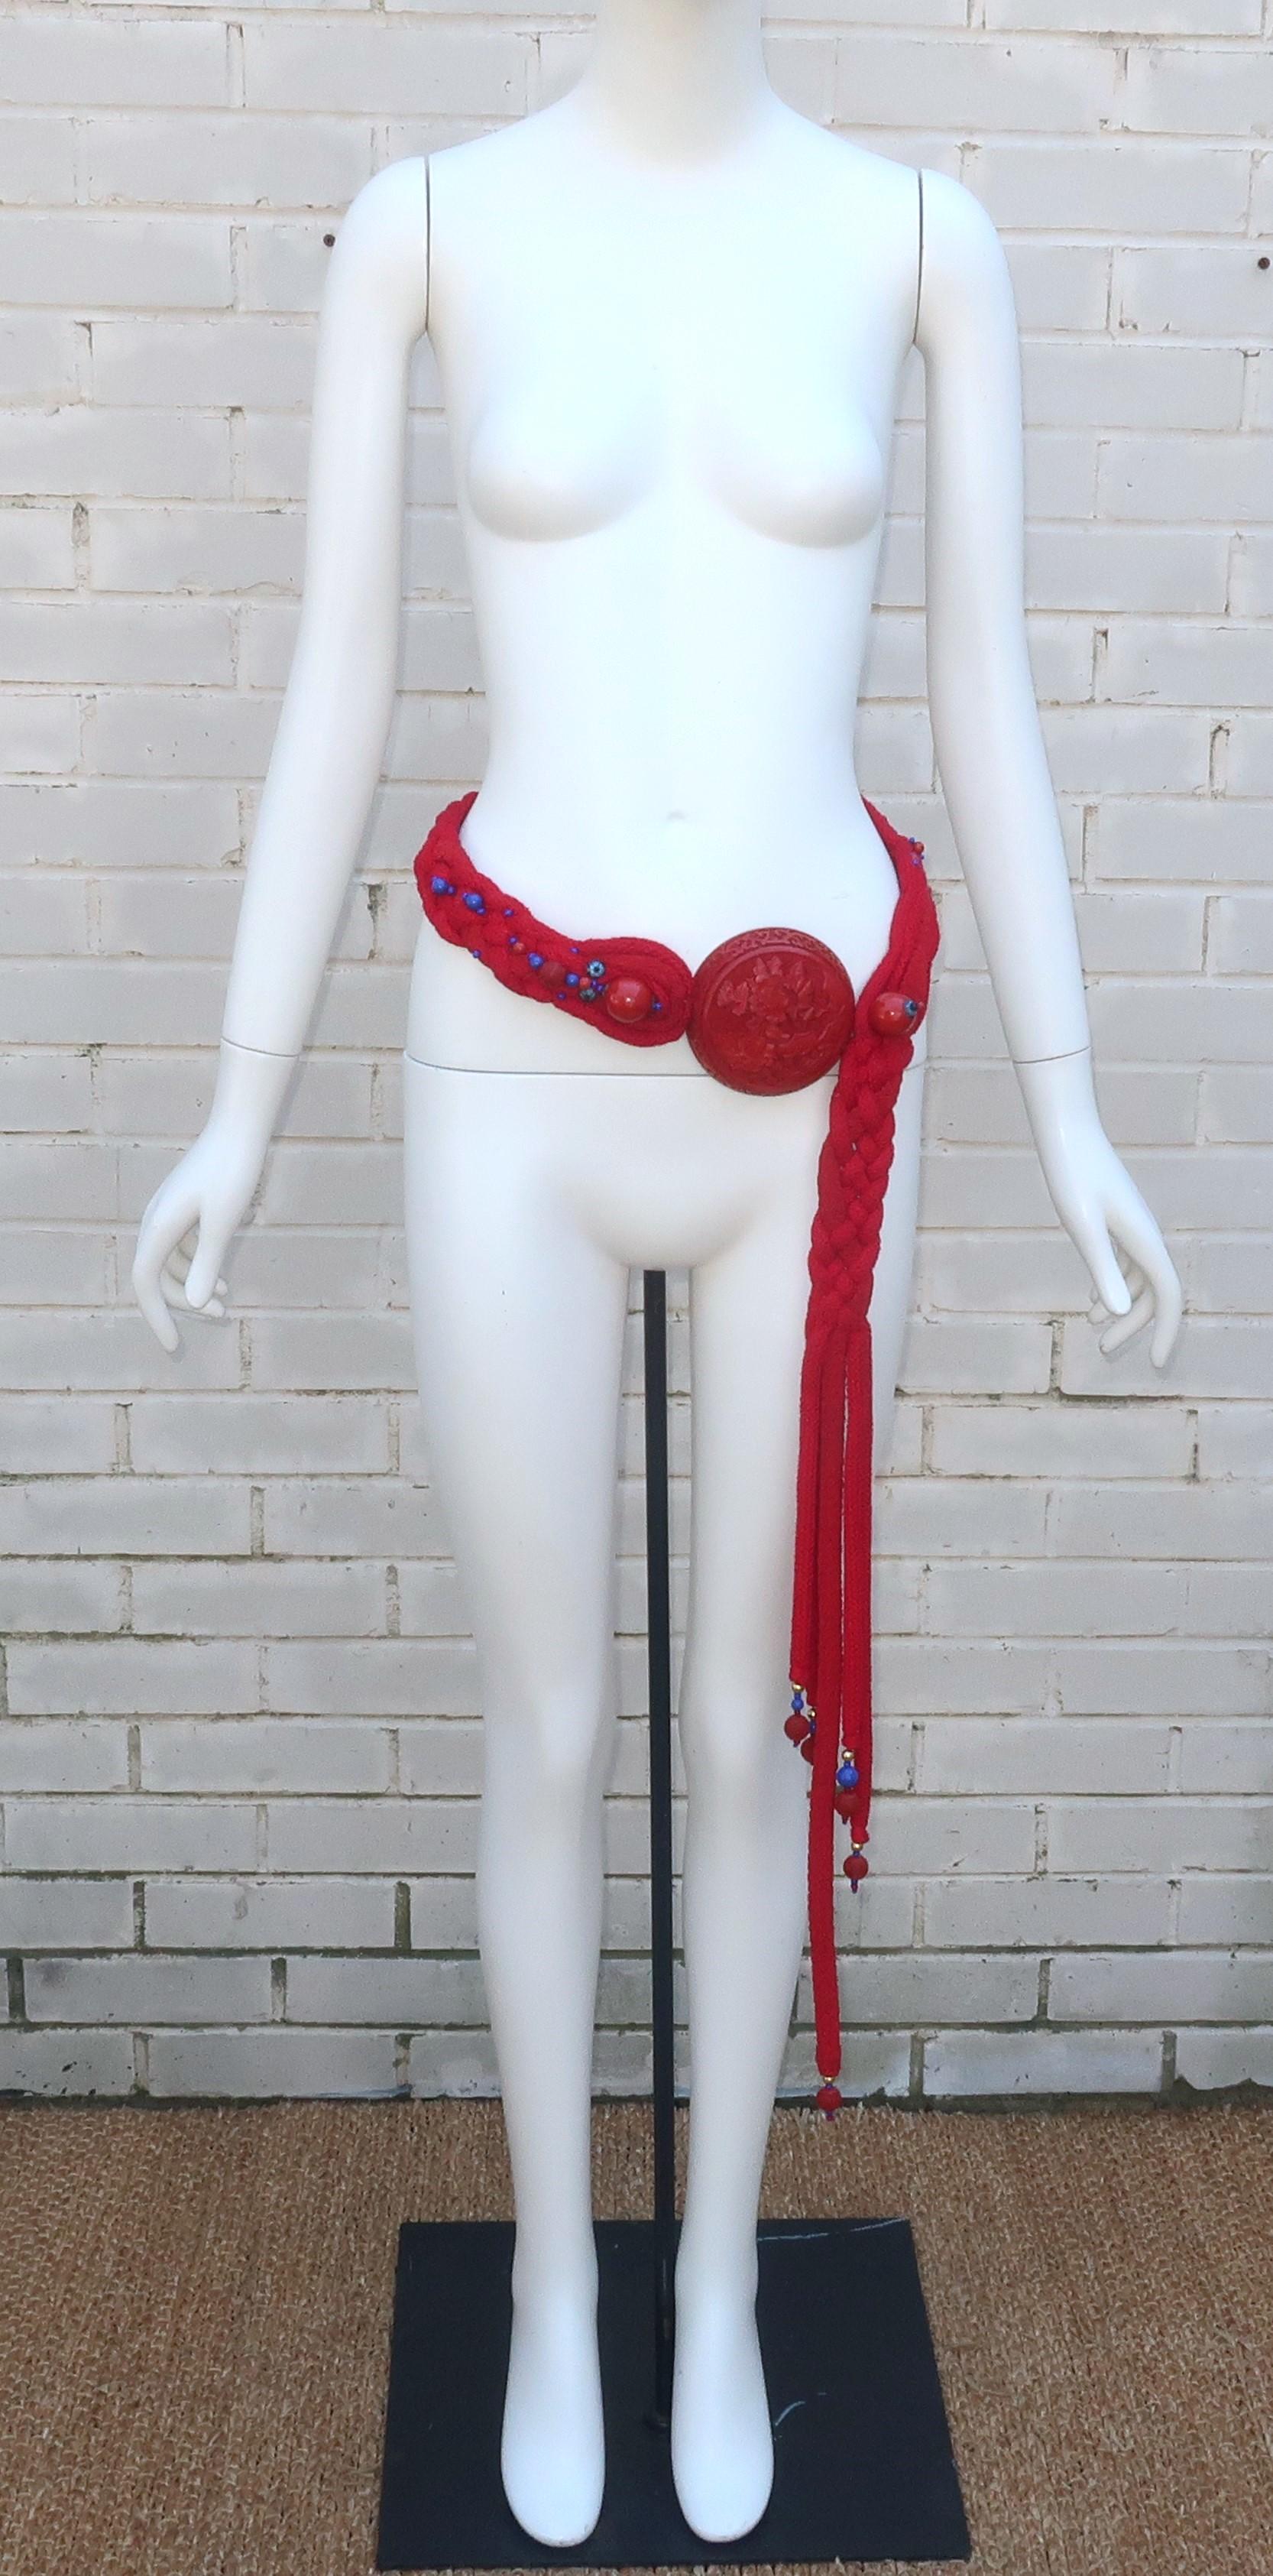 1980's Rafael Sanchez red braided belt with a statement making cinnabar resin medallion, enameled florets and glass beading.  The belt has a distinctive Asian influence and is reminiscent of traditional Chinese regalia.  The cinnabar medallion is